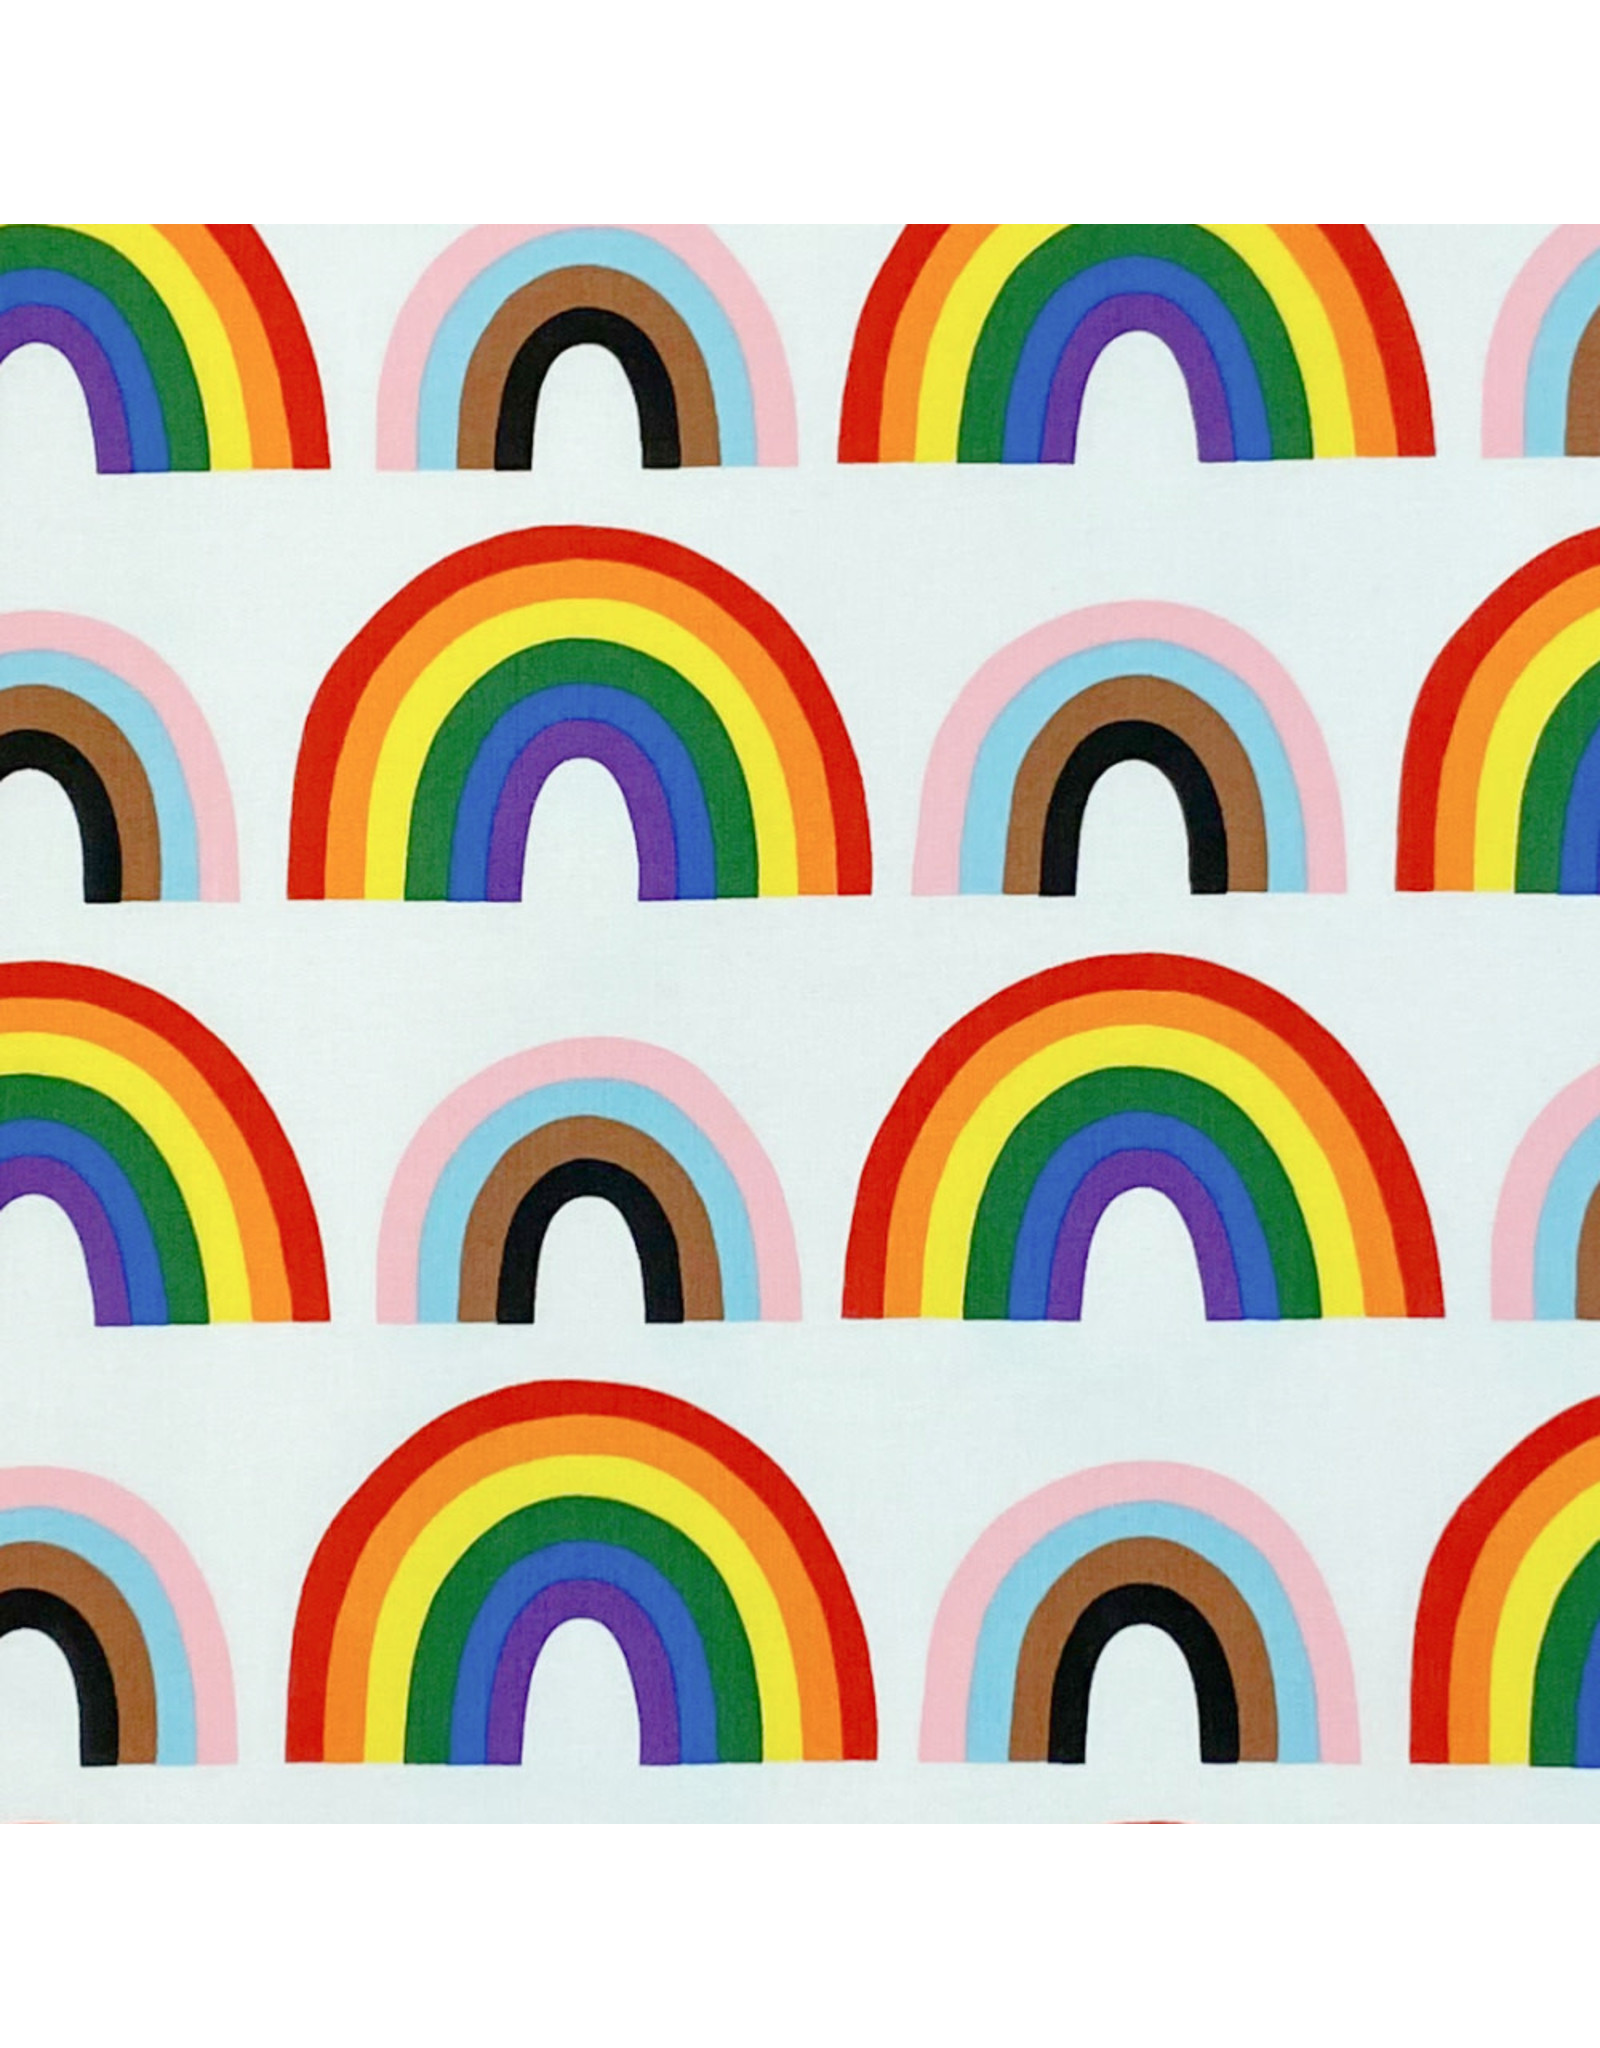 Alexander Henry Fabrics Love is Love, Double Rainbow in Natural, Fabric Half-Yards